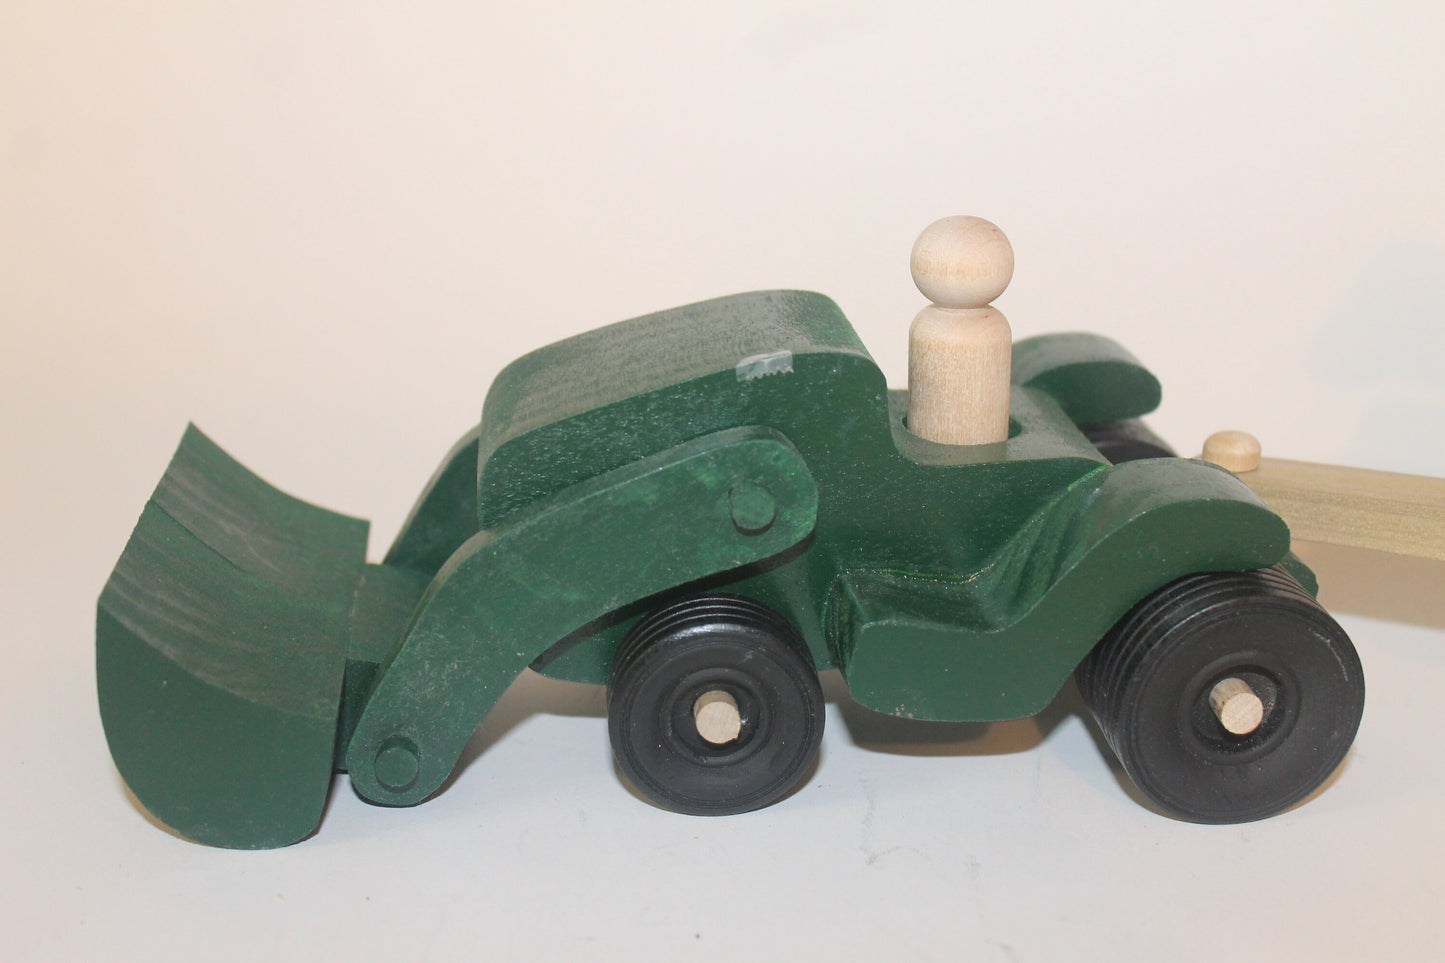 Tractor with front bucket, pulls included wagon and horses, wooden toy